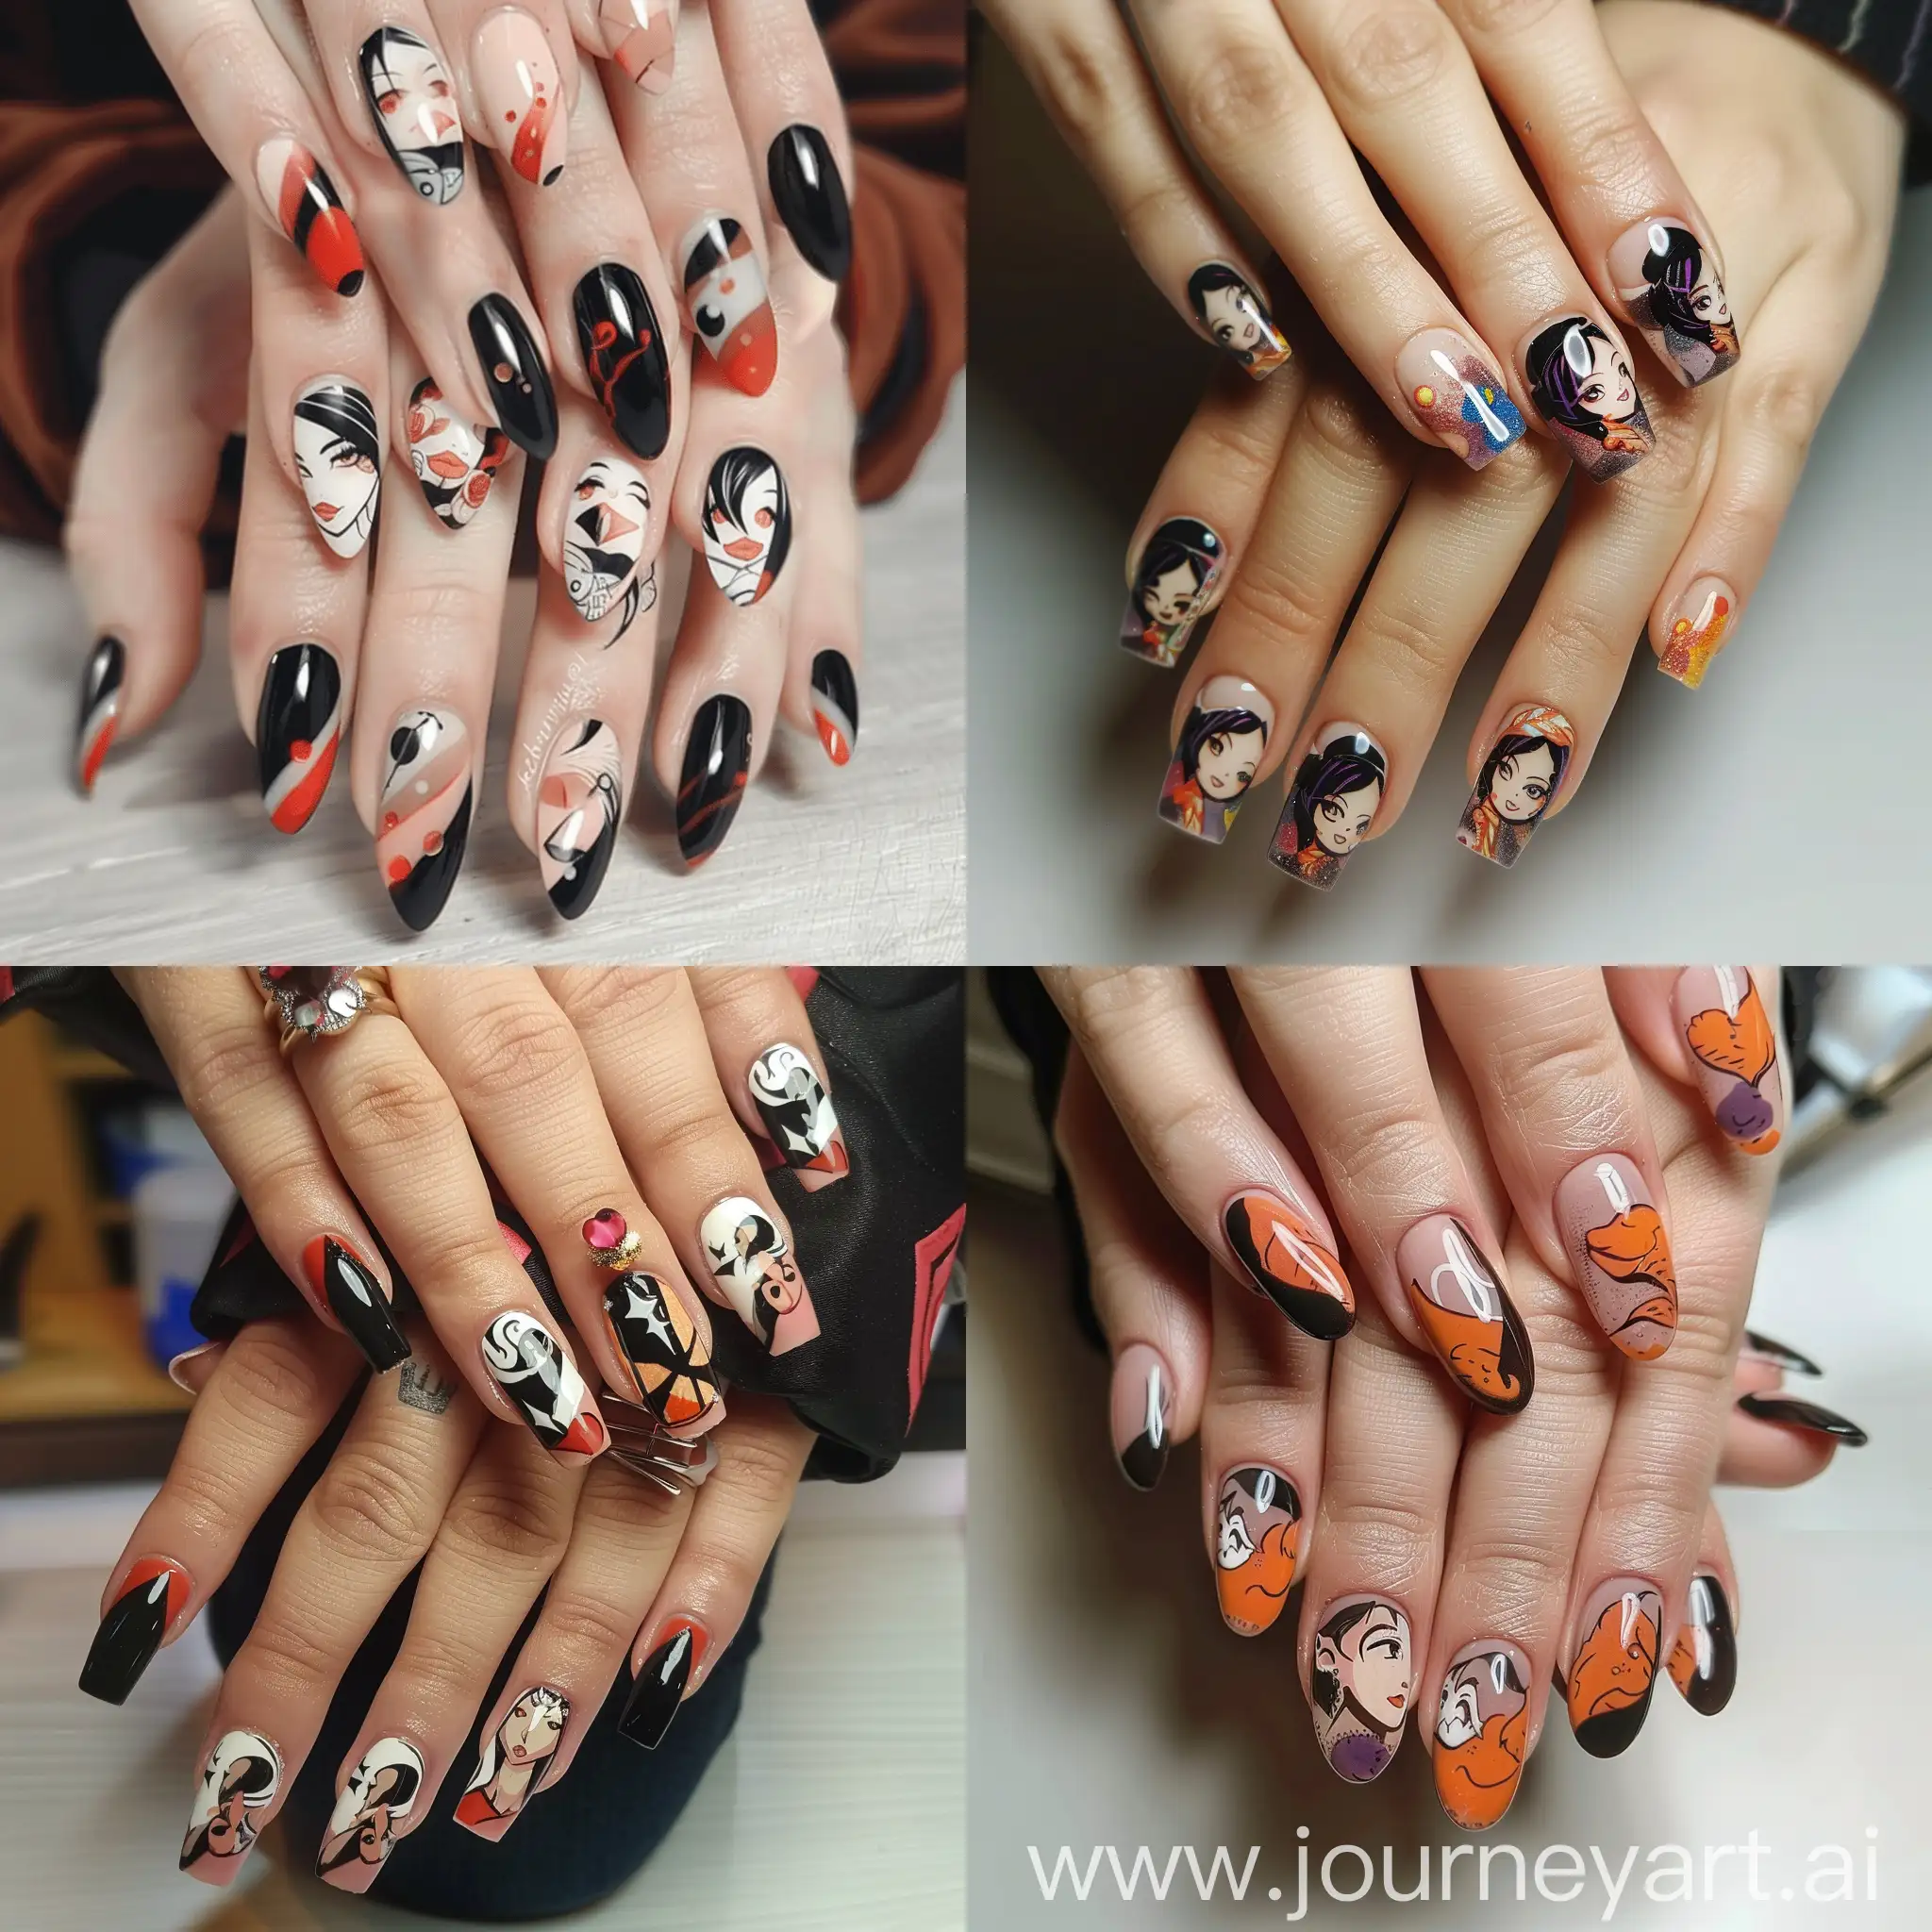 Make a modern manicure design in the style of a Genshin impact character named Kazuha